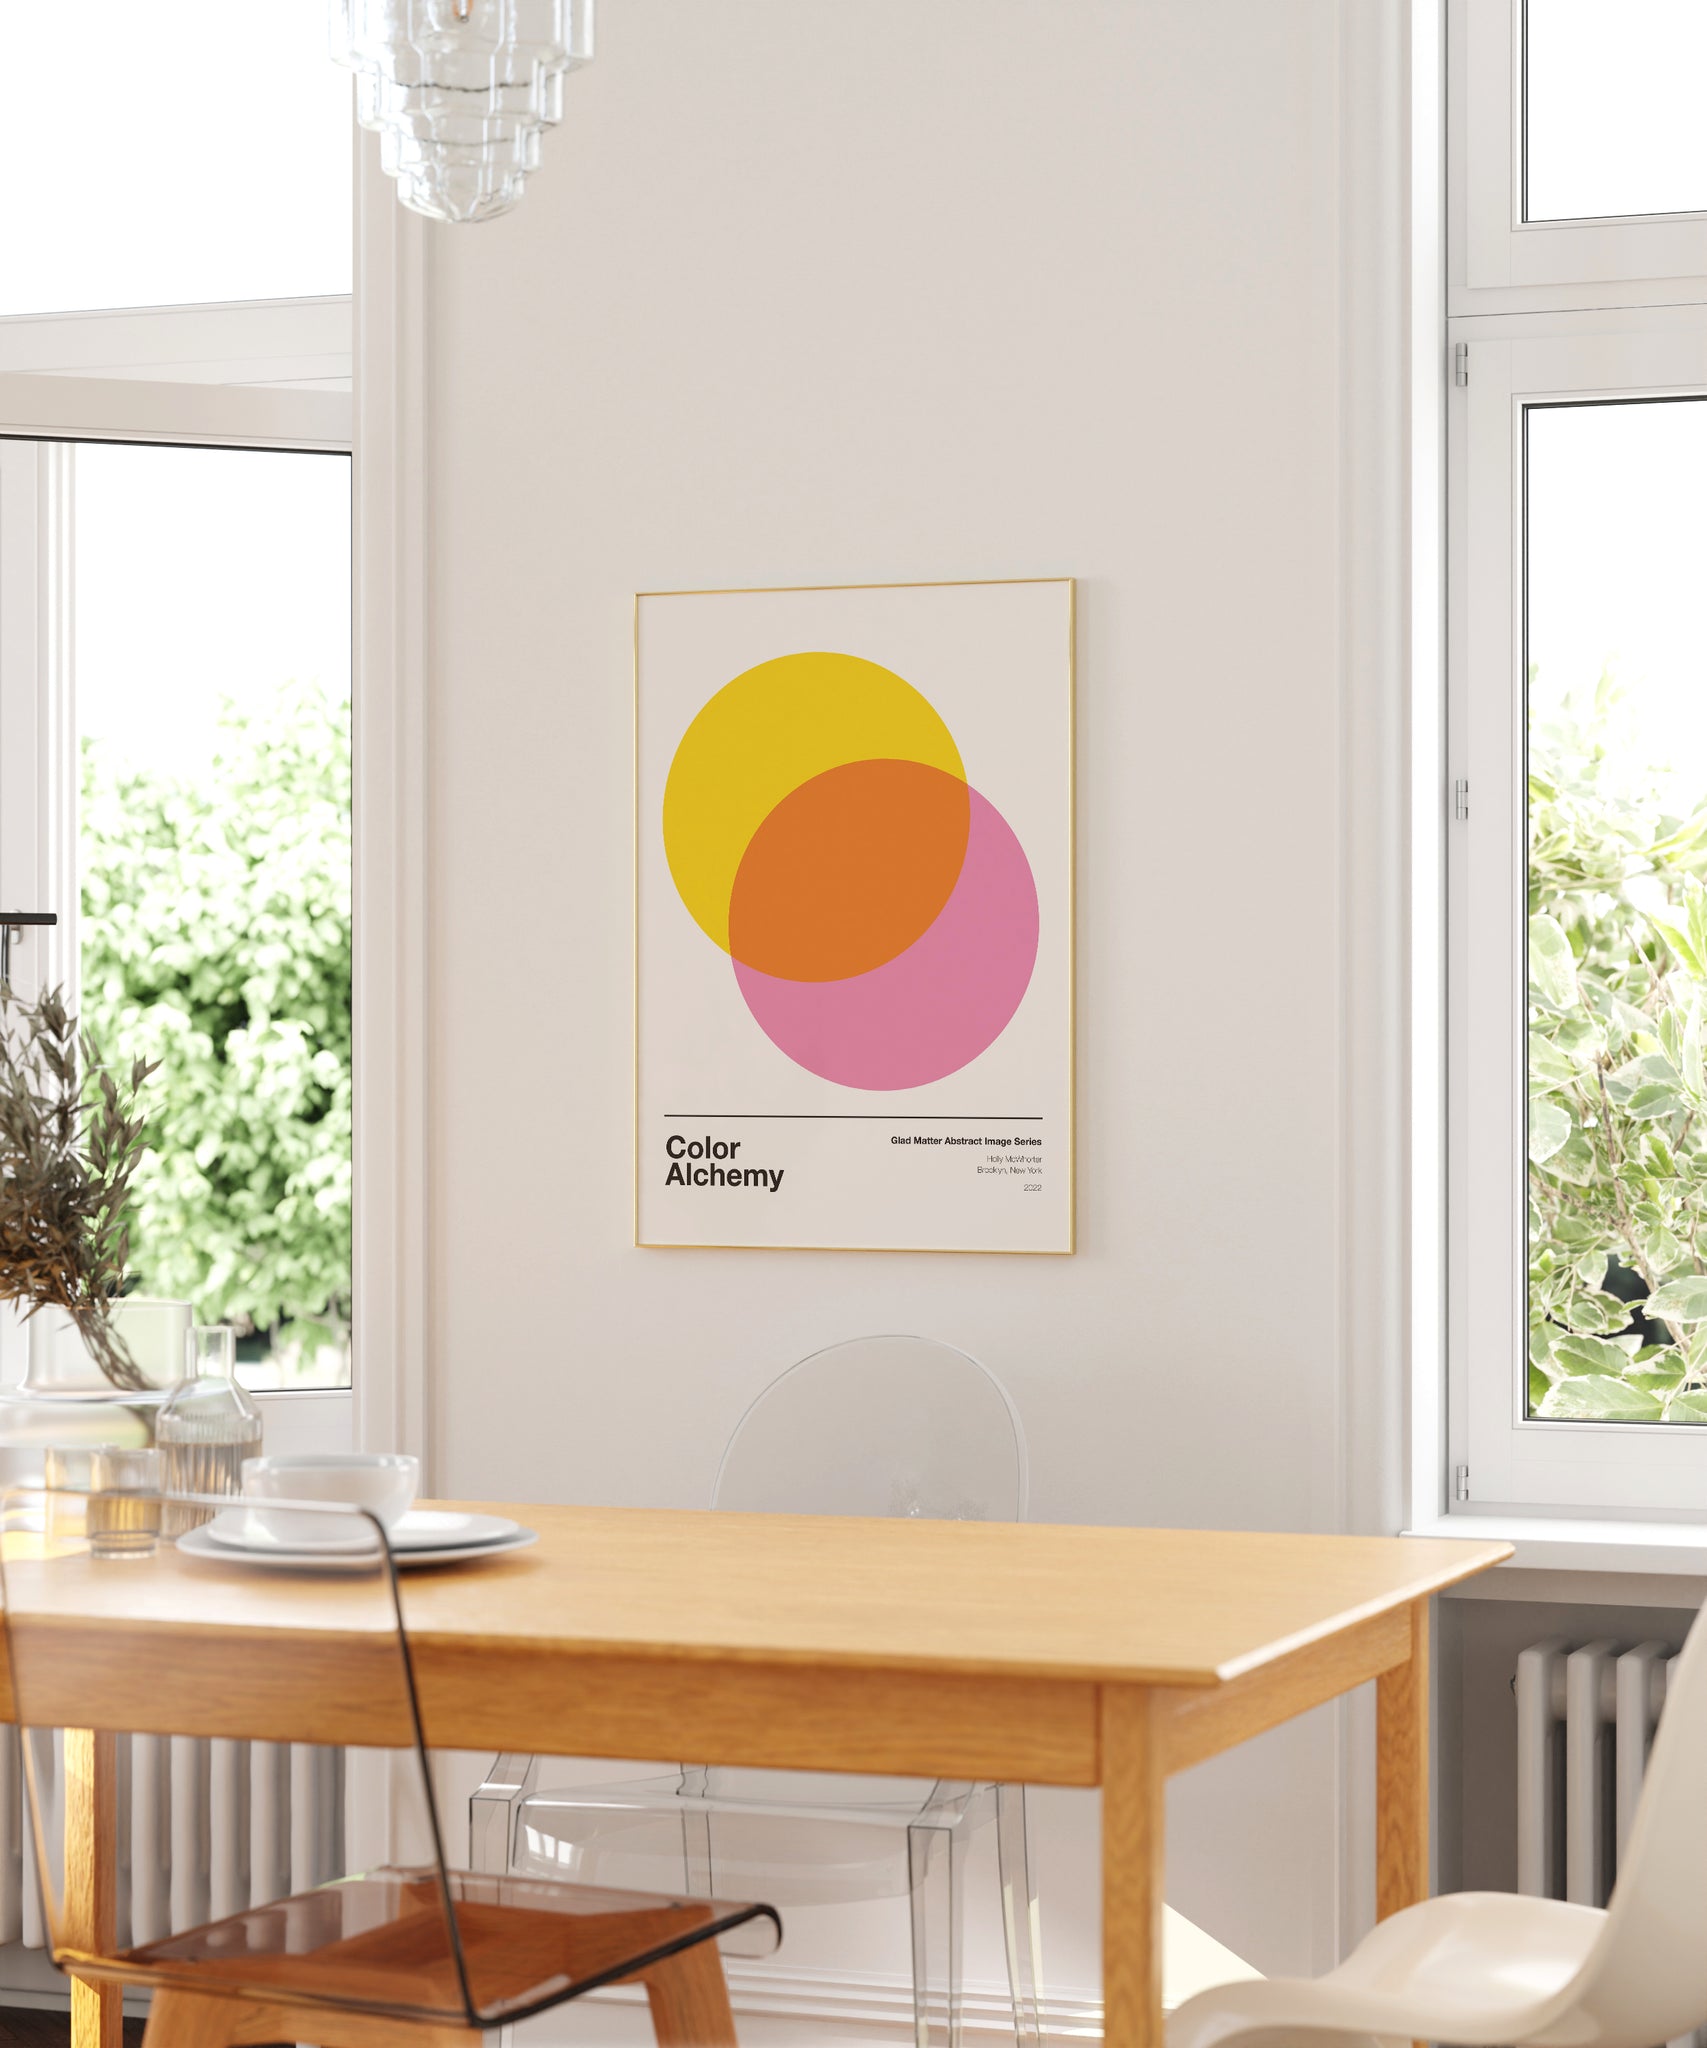 Color Alchemy: Pink Yellow - Fine Art Giclée Print by Holly McWhorter